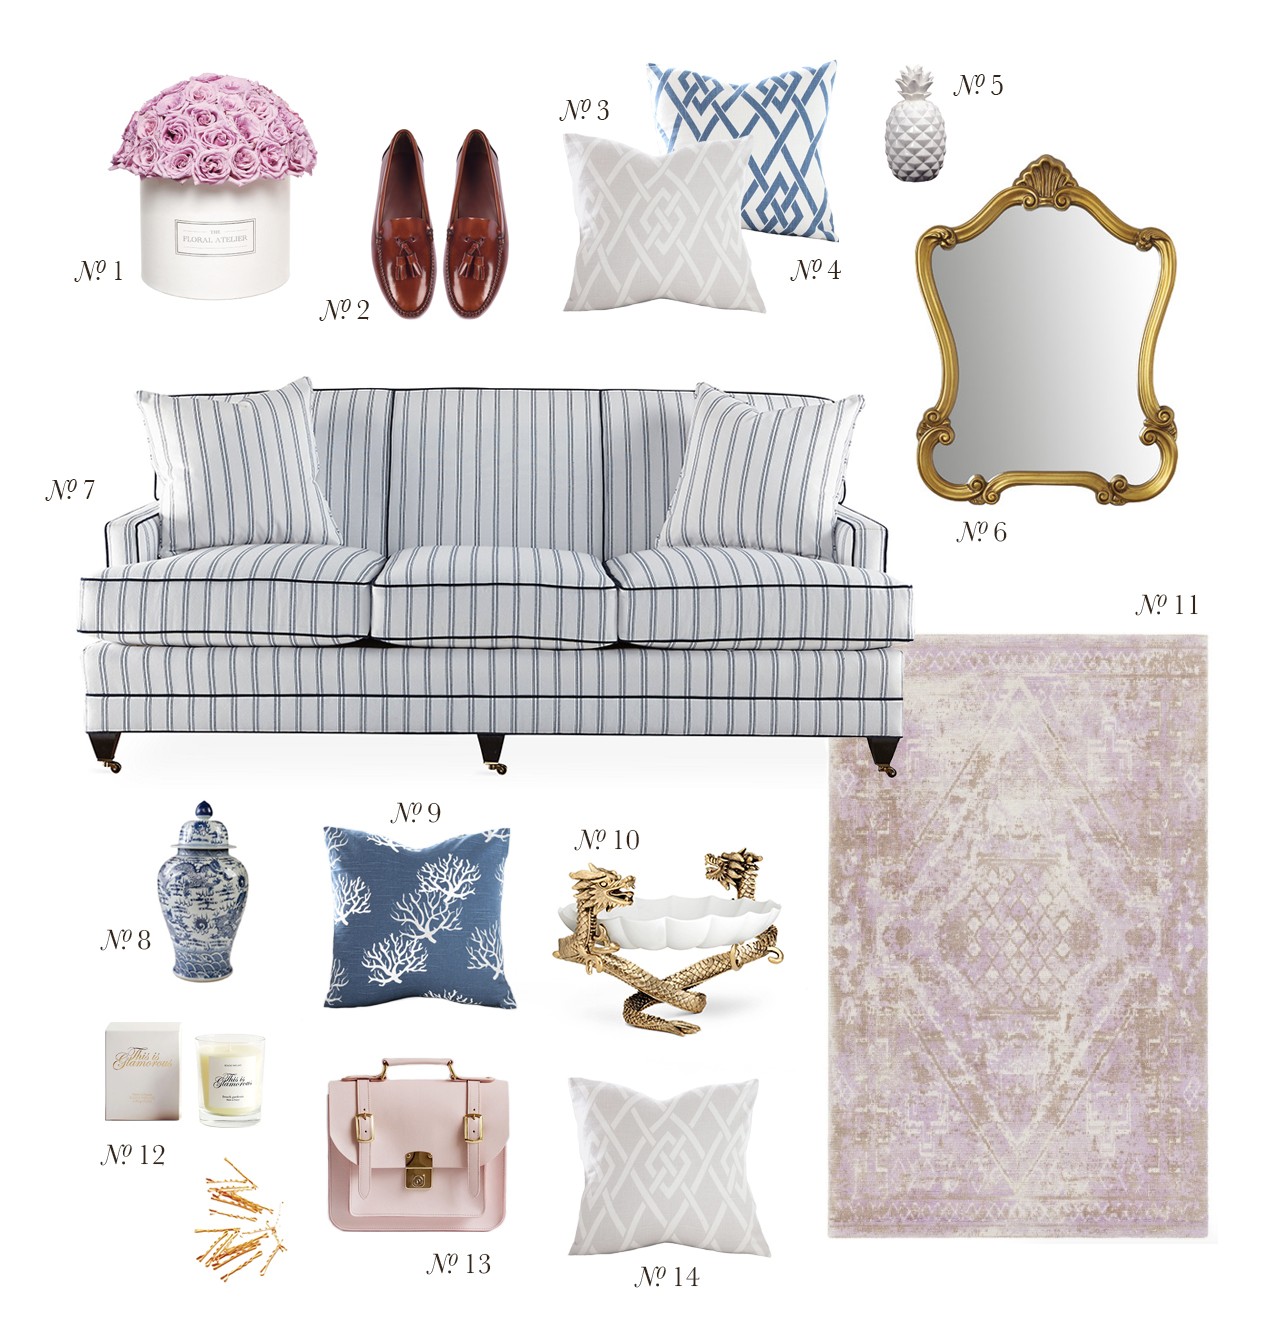 Décor Inspiration | At Home: Shades of Blue & Soft Pink in the Living Room